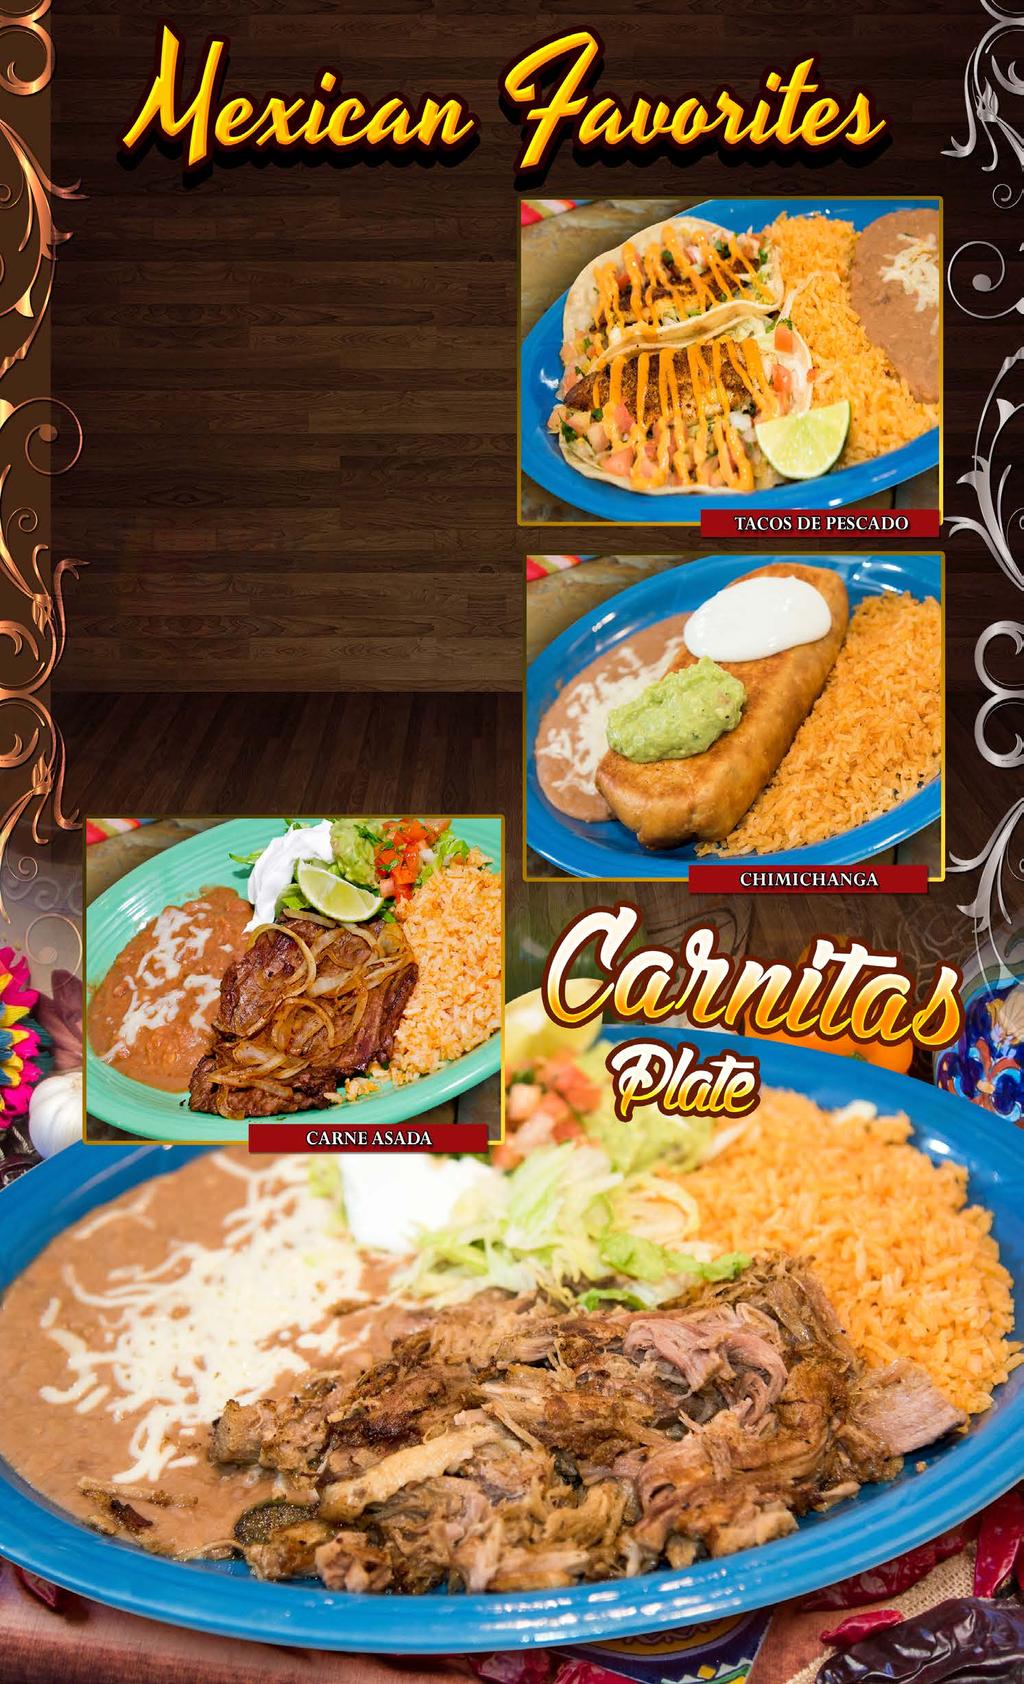 MEXICAN FAVORITIES Served with rice and beans CARNITAS PLATE Fried pork served with rice, beans, pico de gallo, guacamole, sour cream and tortillas. 14.